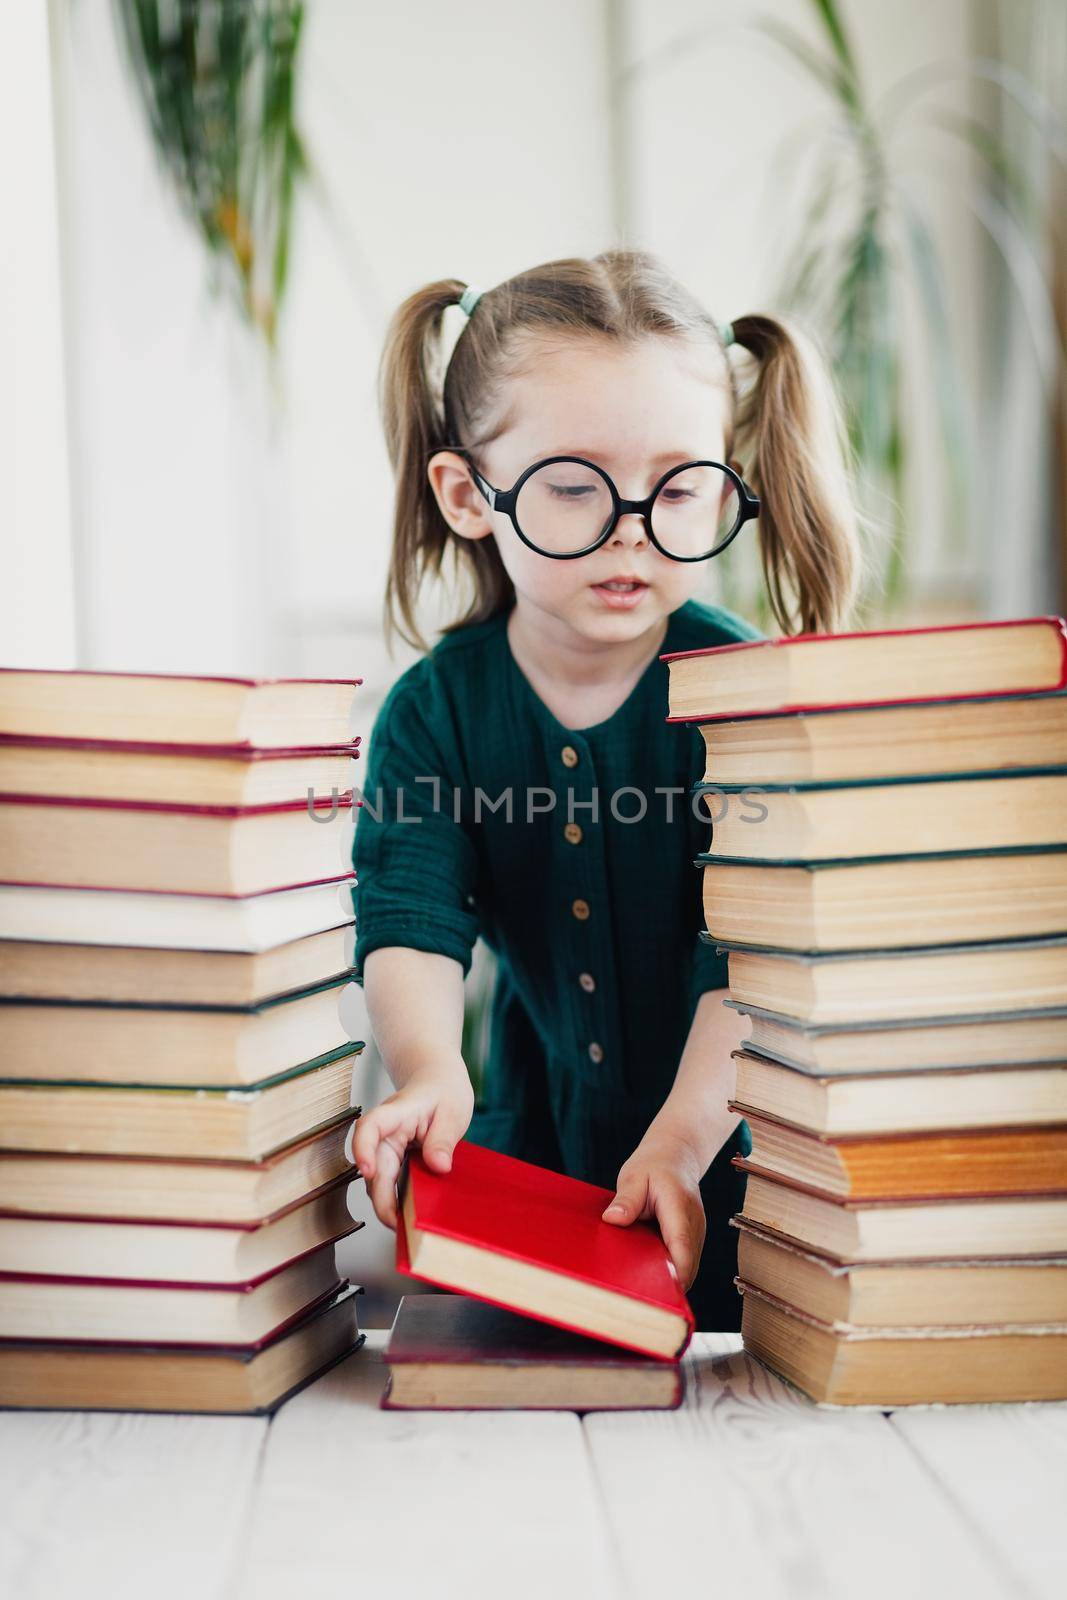 Cute little girl in round shaped glasses and green muslin dress folds colorful books in order.